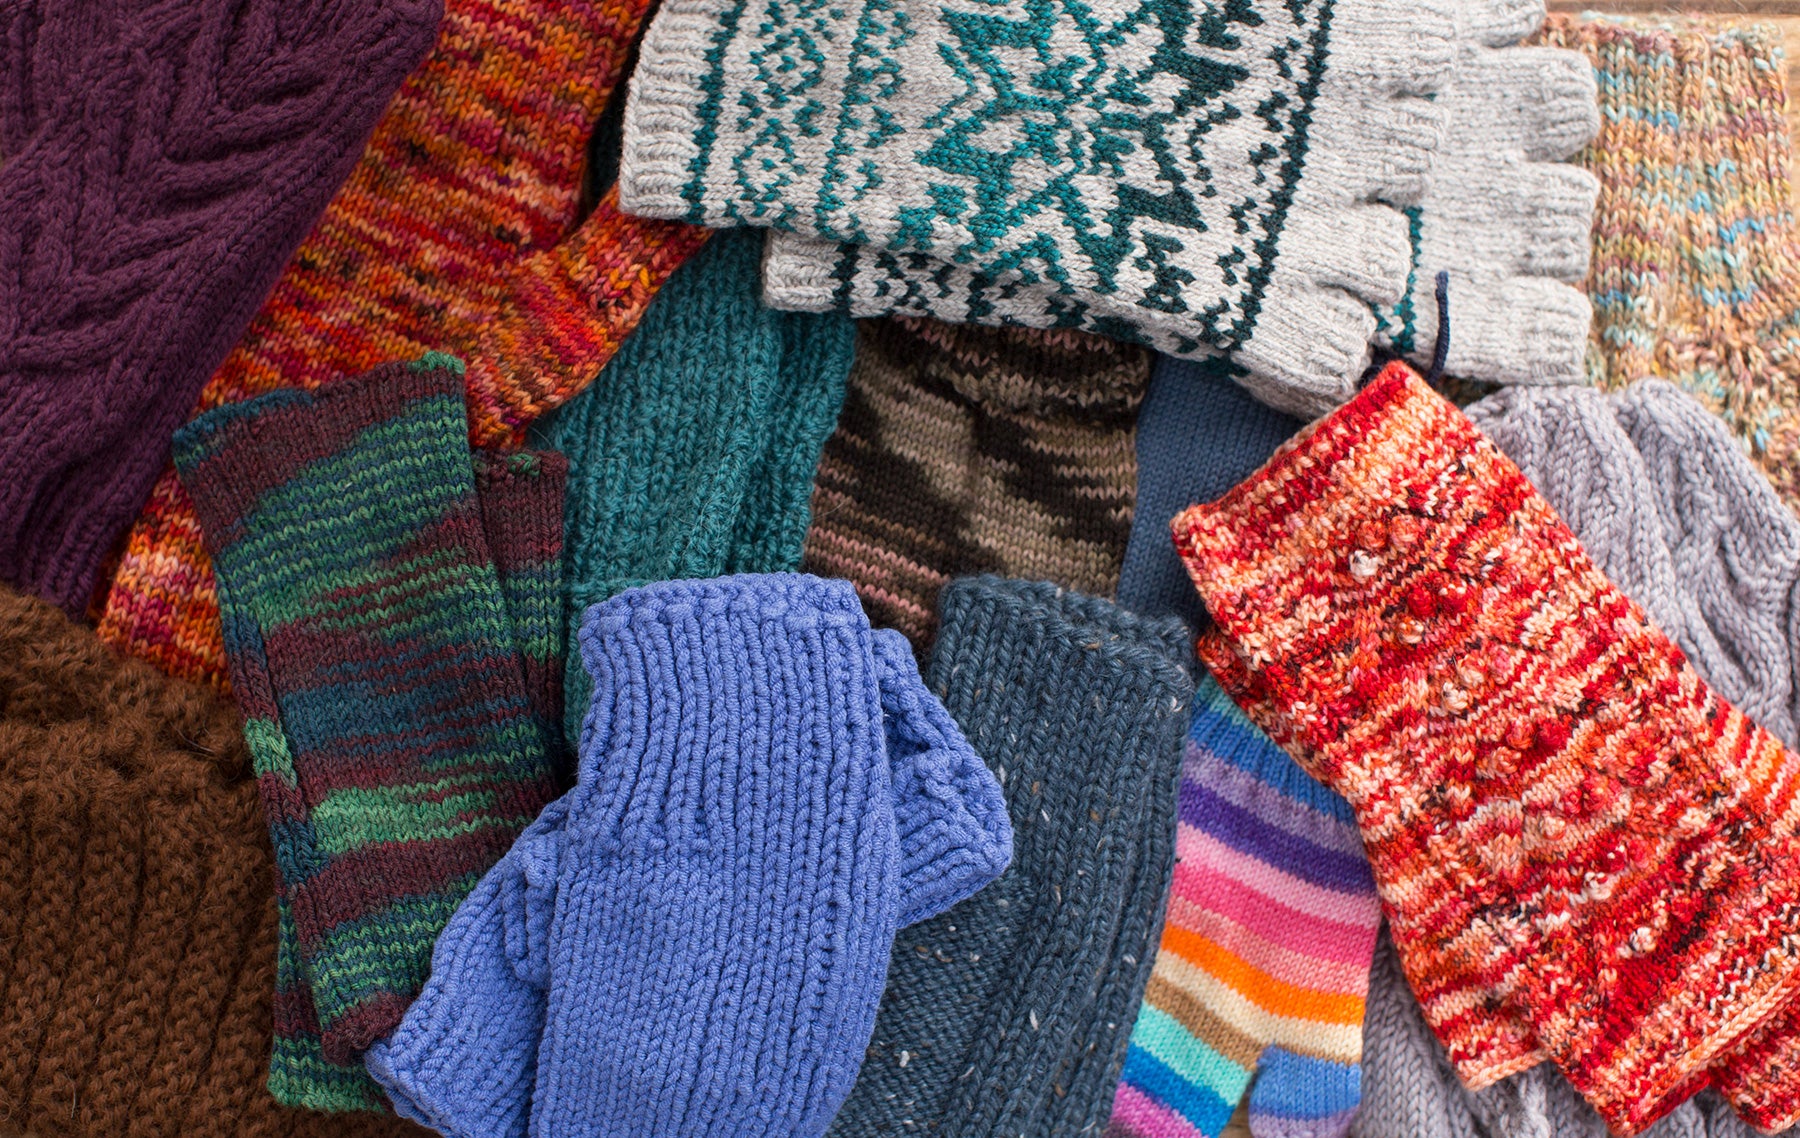 A variety of knitted gloves sent to the TOM BIHN crew by the Ravelry knitting forum.